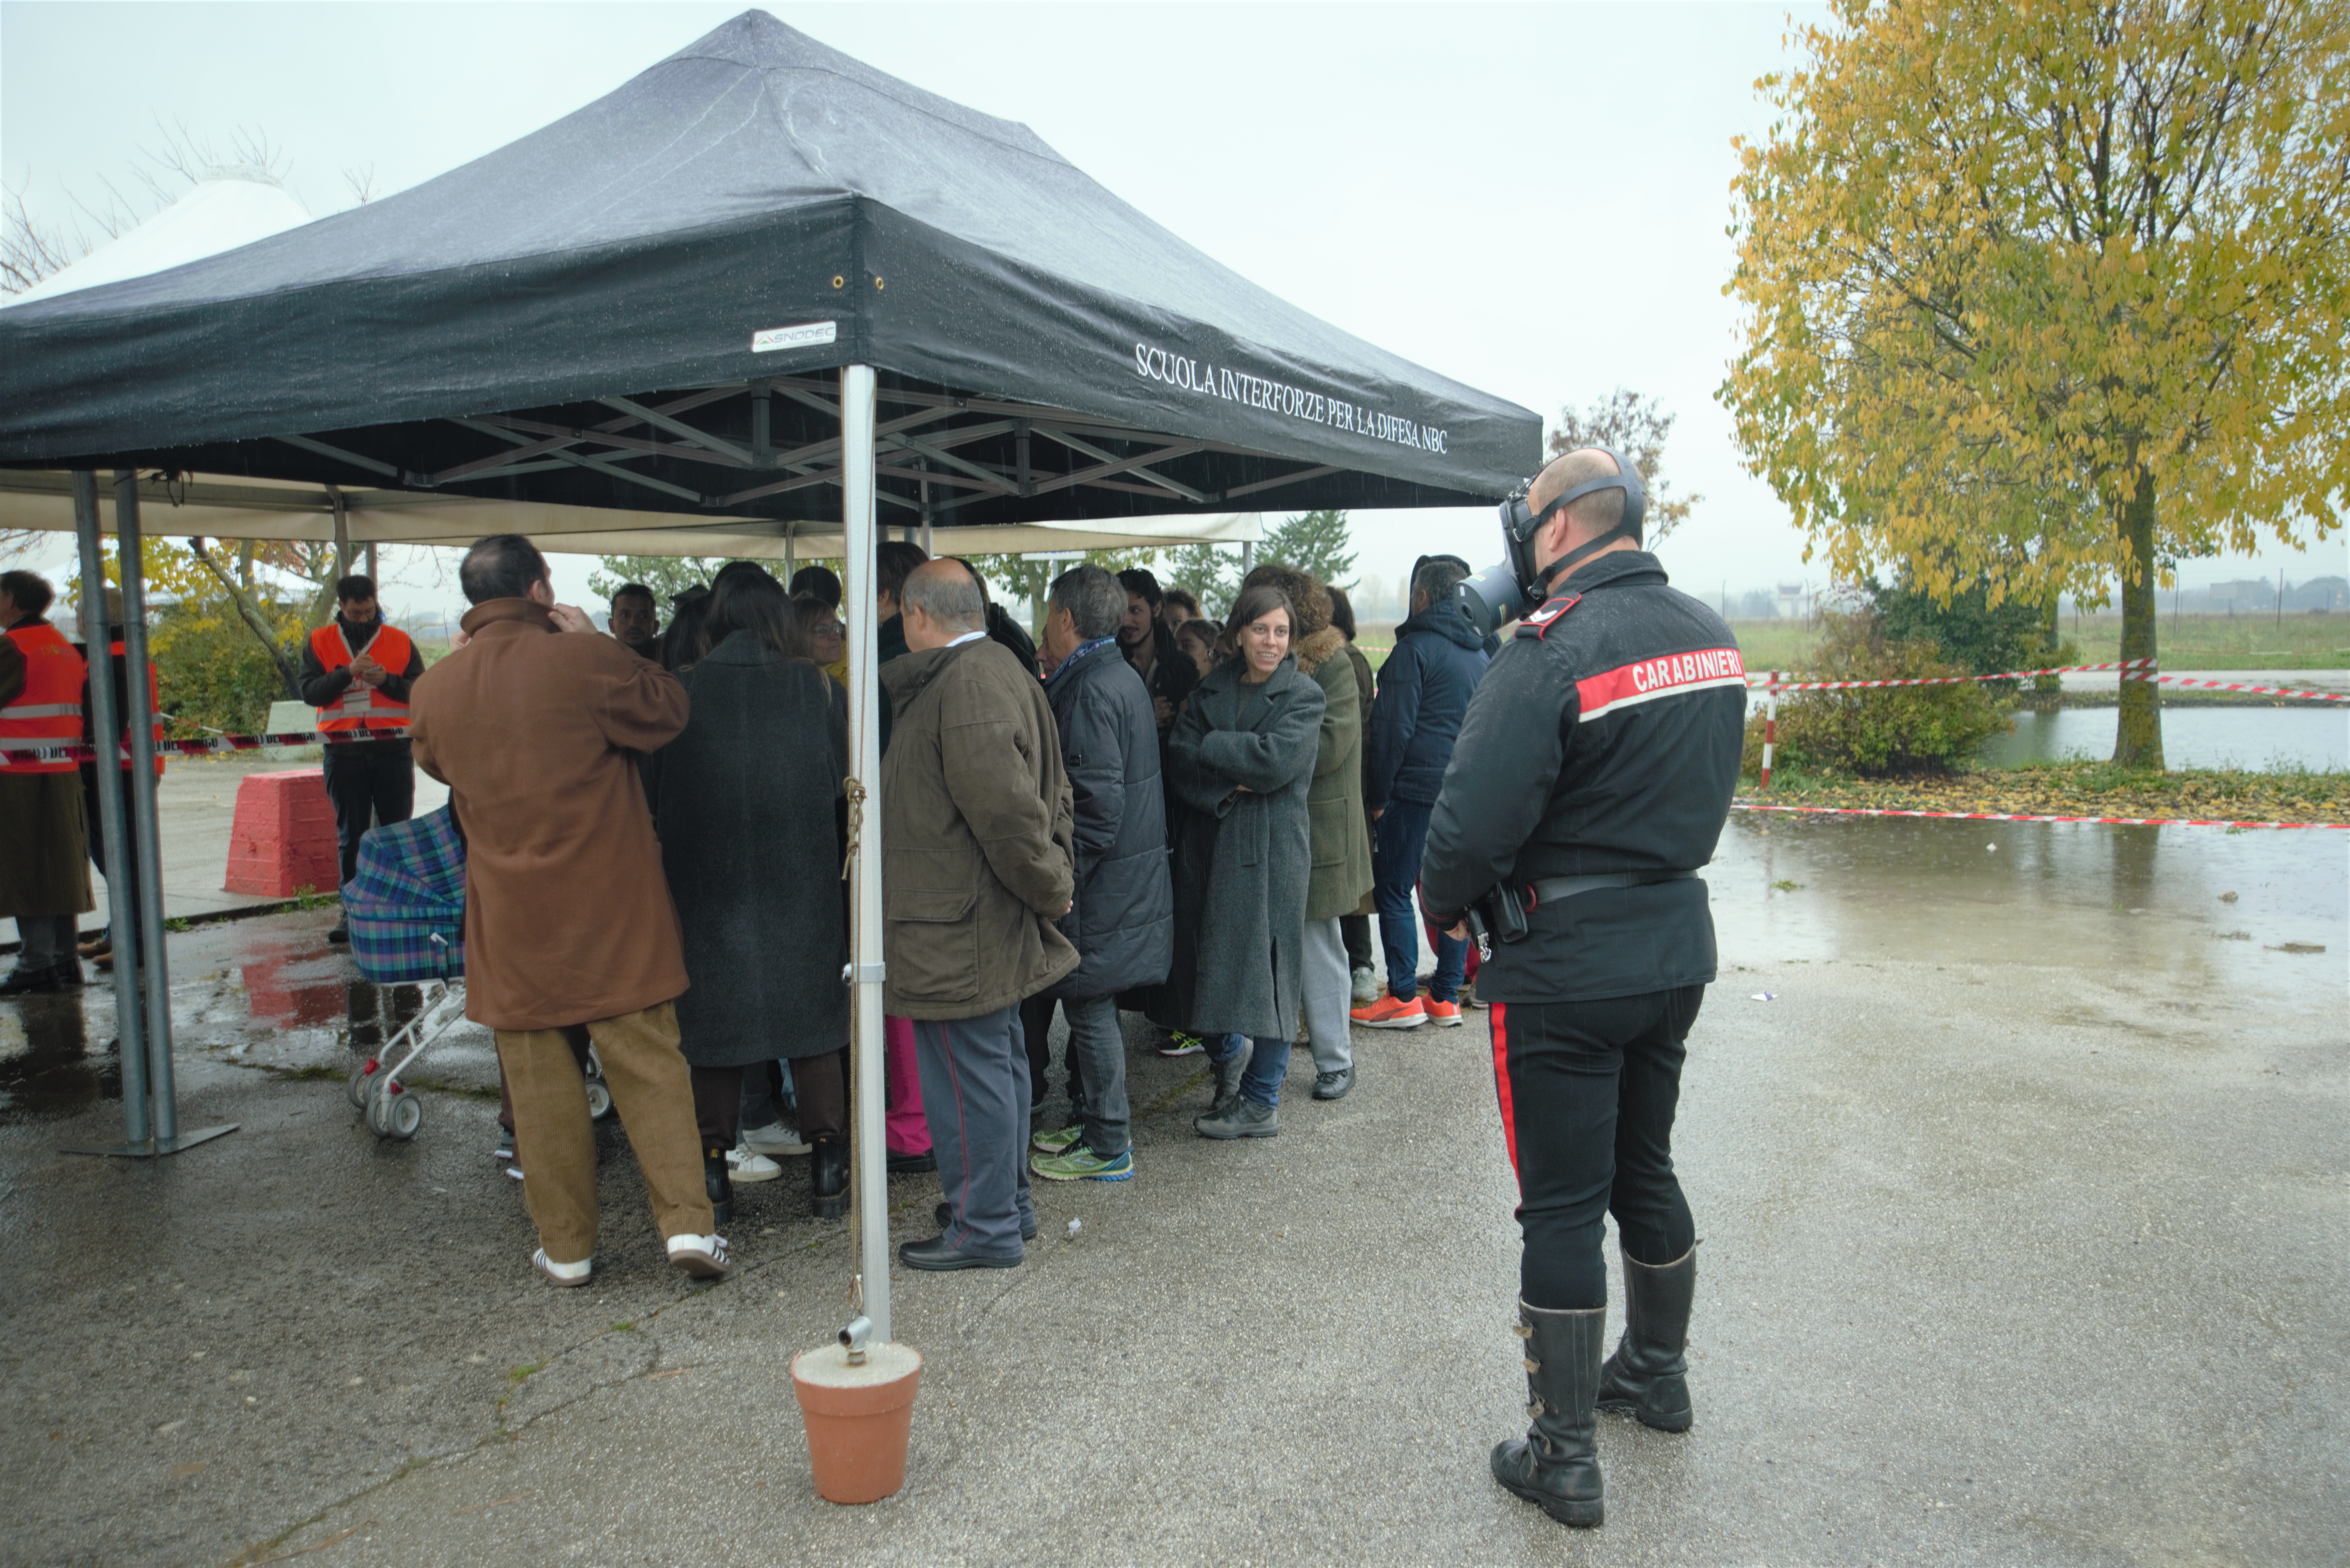 A group of people (around 20) are huddled together under a black tent with no sides. Outside the tent, a carabinieri officer (man) can be seen wearing a respirator. Some people wearing orange tabards are also visible.